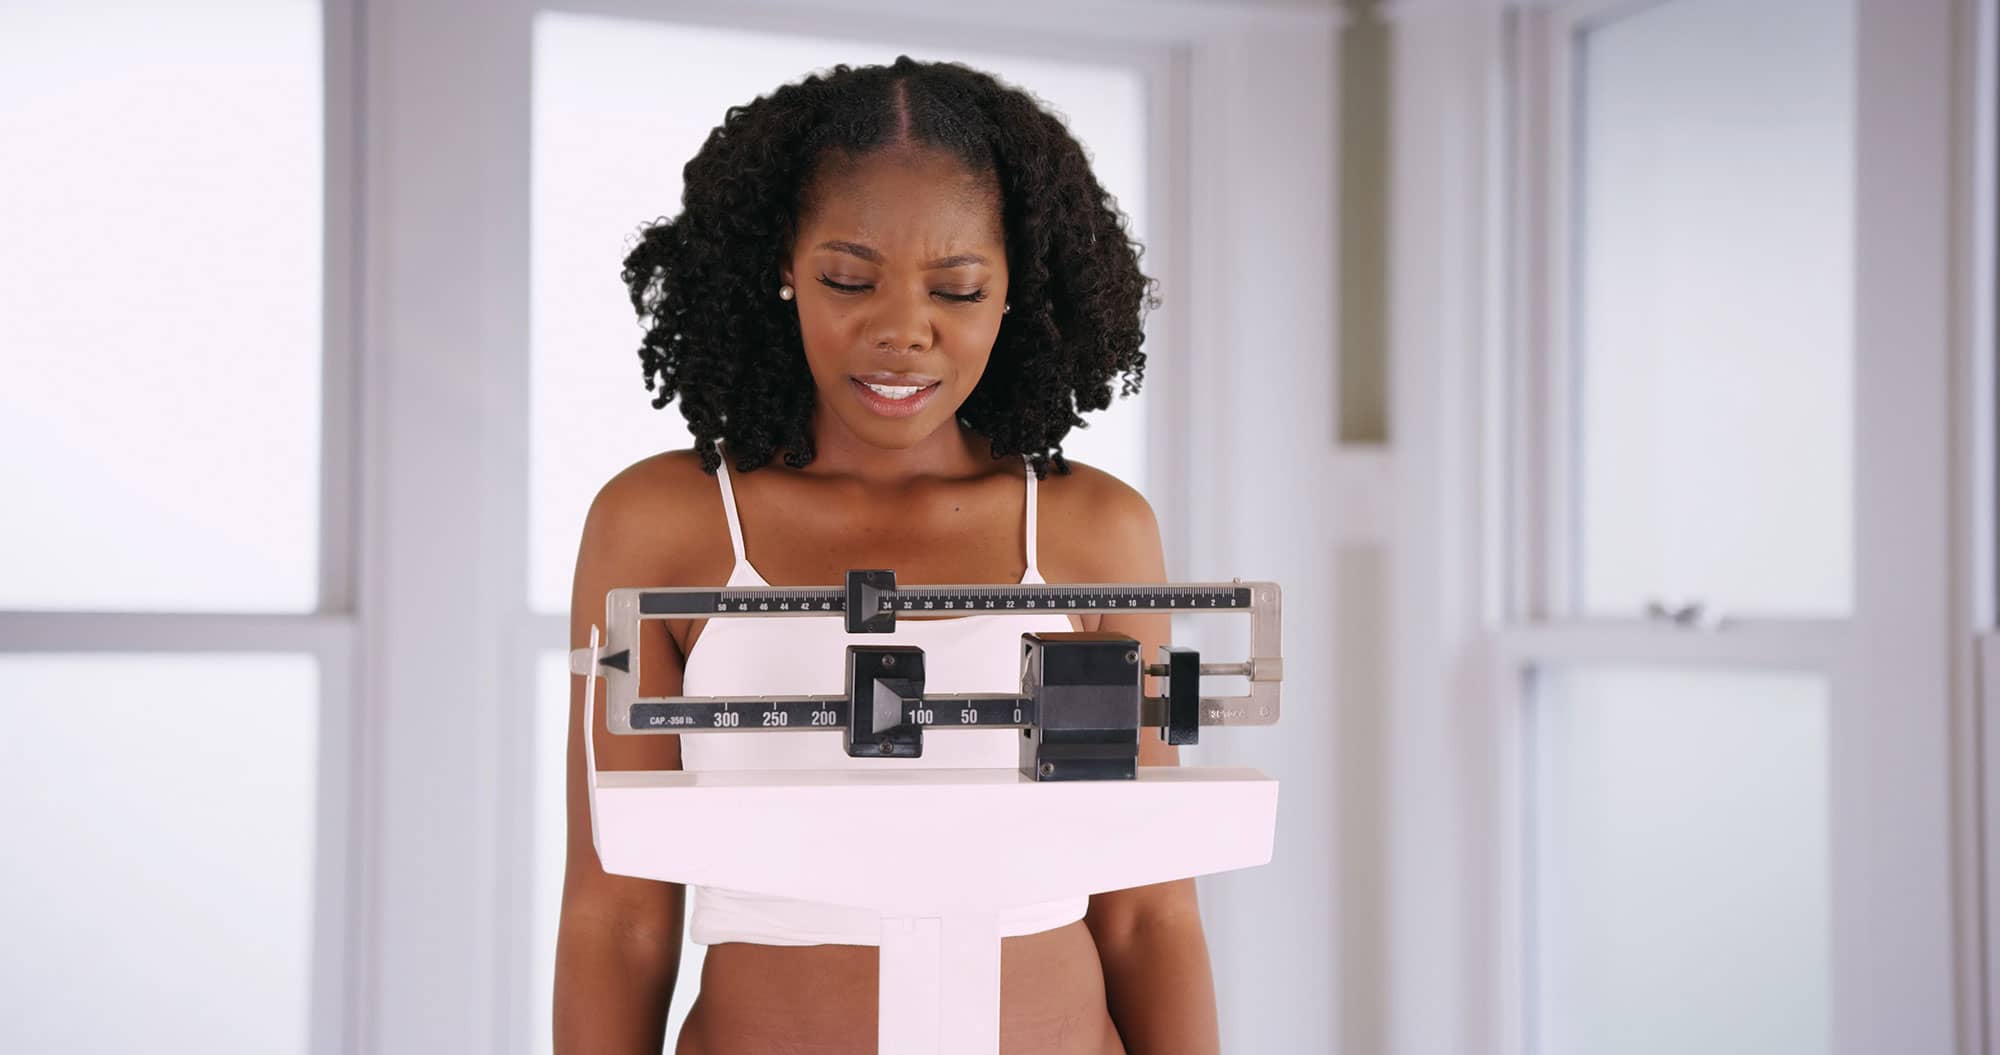 Woman looks at her weight while standing on a scale